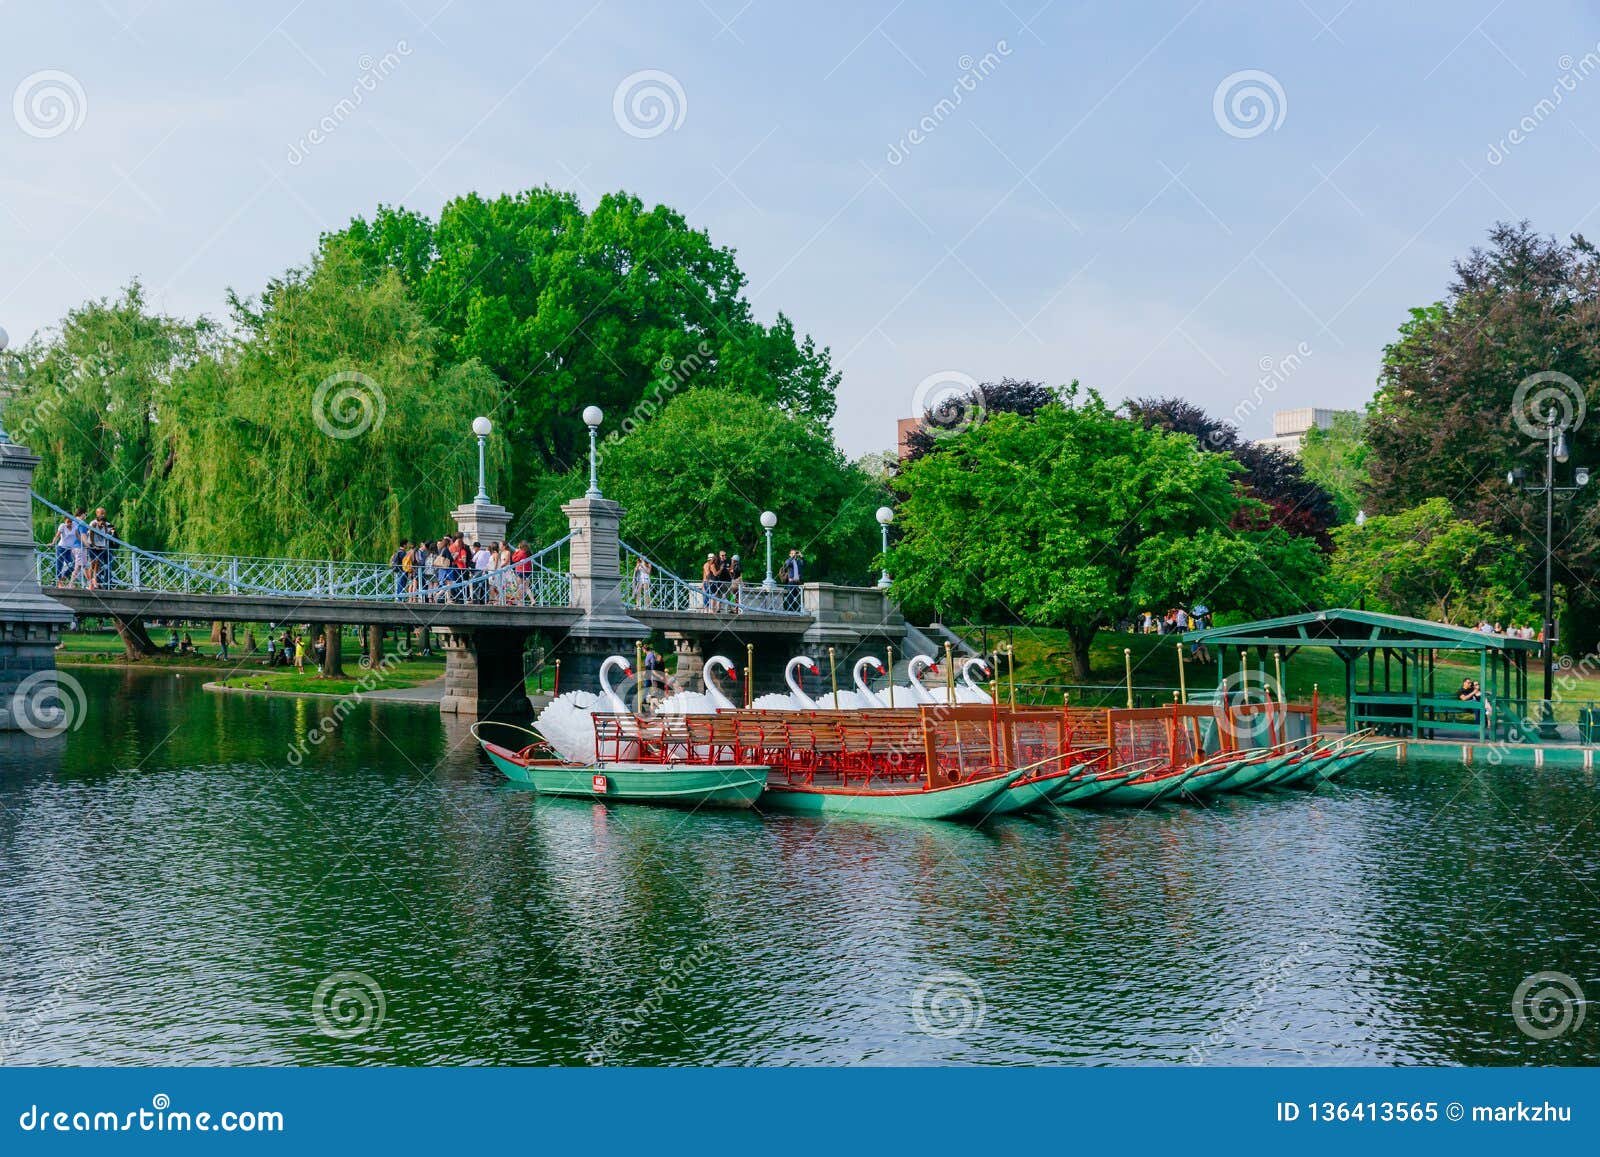 View Of Swan Boats And Bridge Over Lake In Boston Public Garden